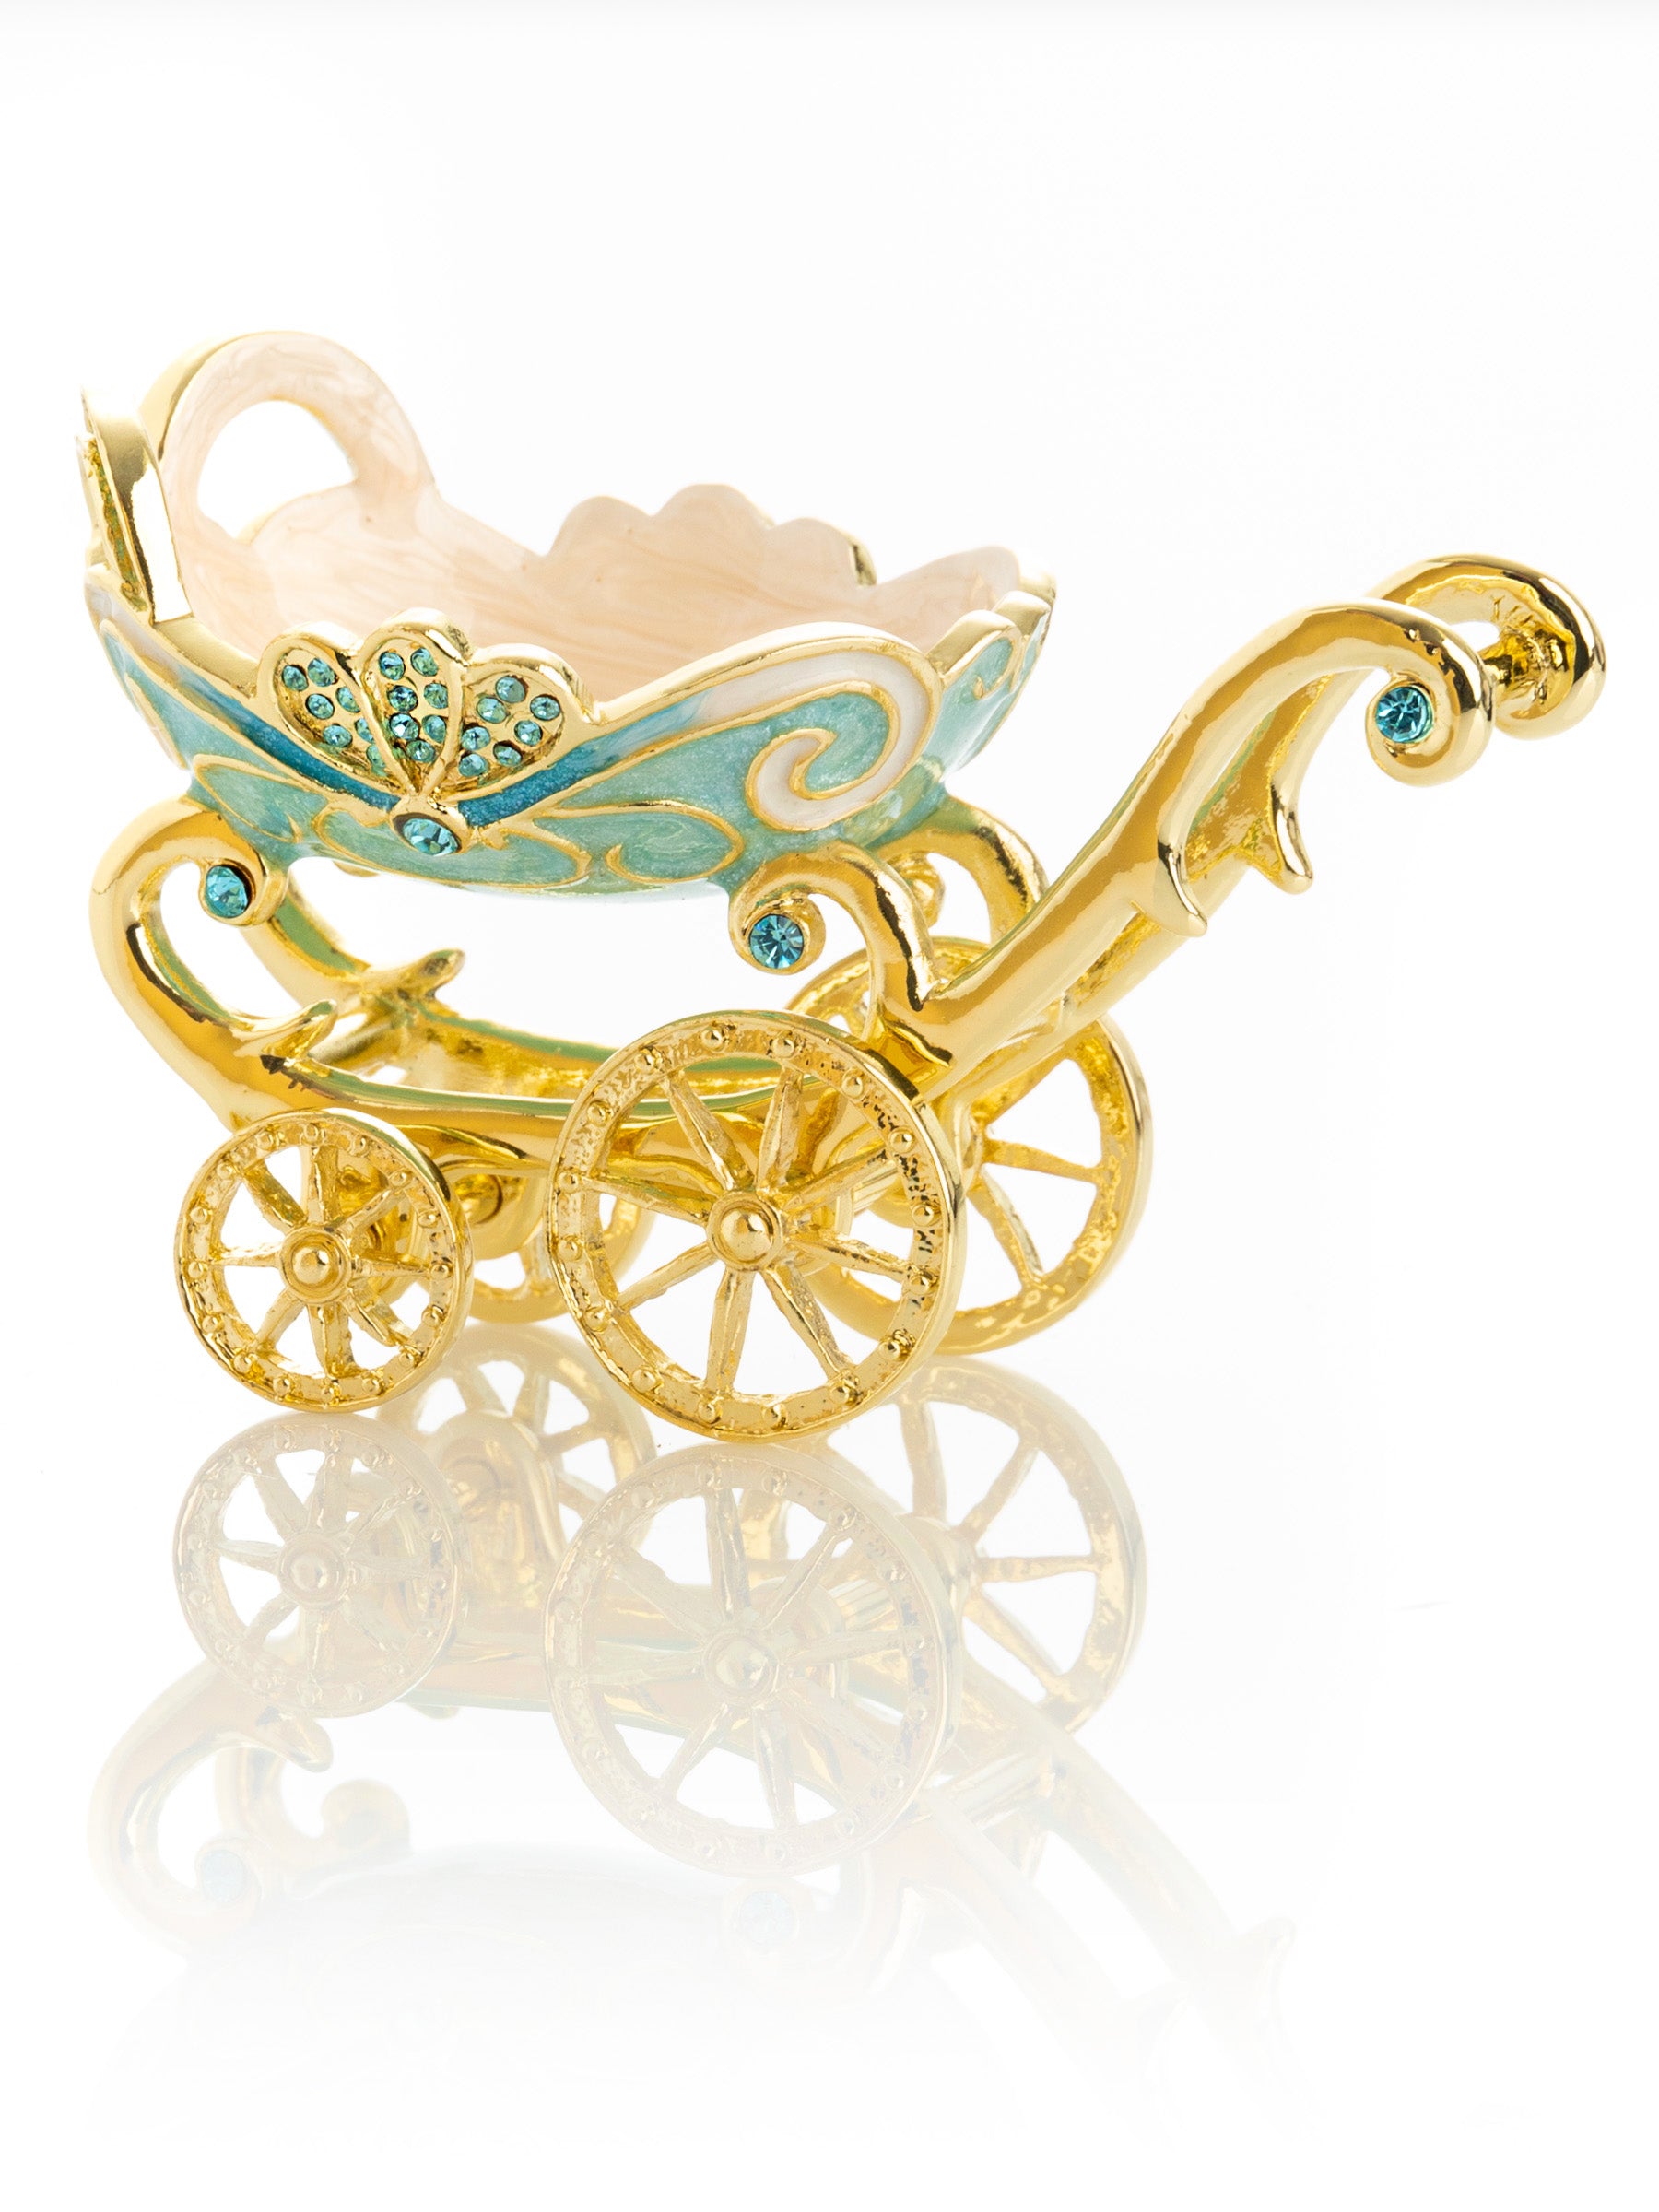 Poussette vintage Turquoise Baby Carriage Trinket Box